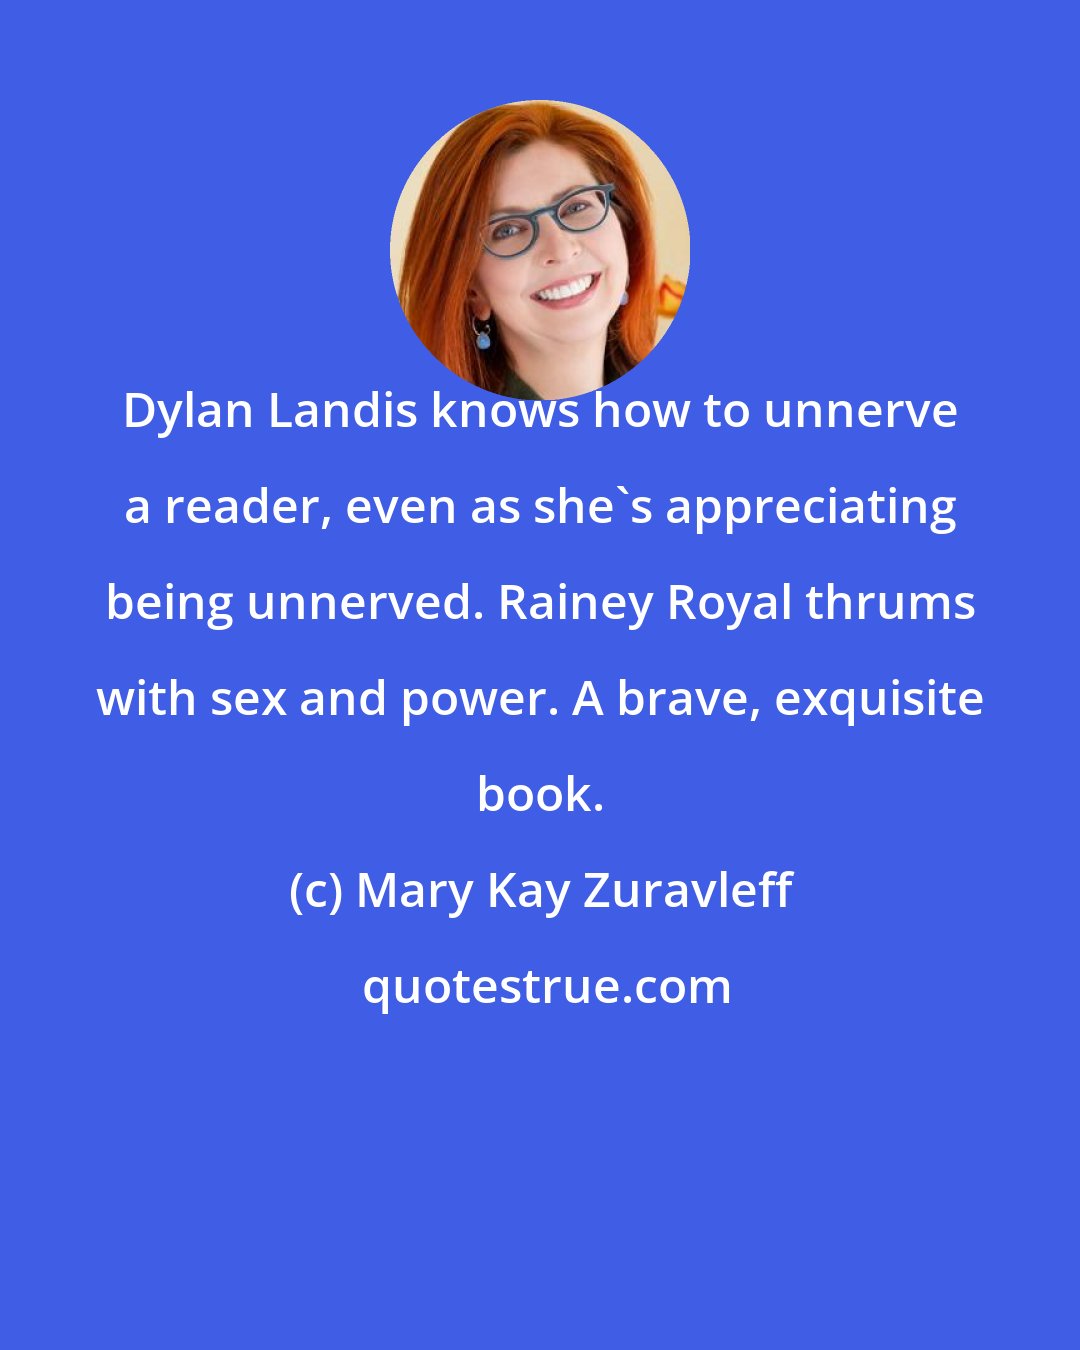 Mary Kay Zuravleff: Dylan Landis knows how to unnerve a reader, even as she's appreciating being unnerved. Rainey Royal thrums with sex and power. A brave, exquisite book.